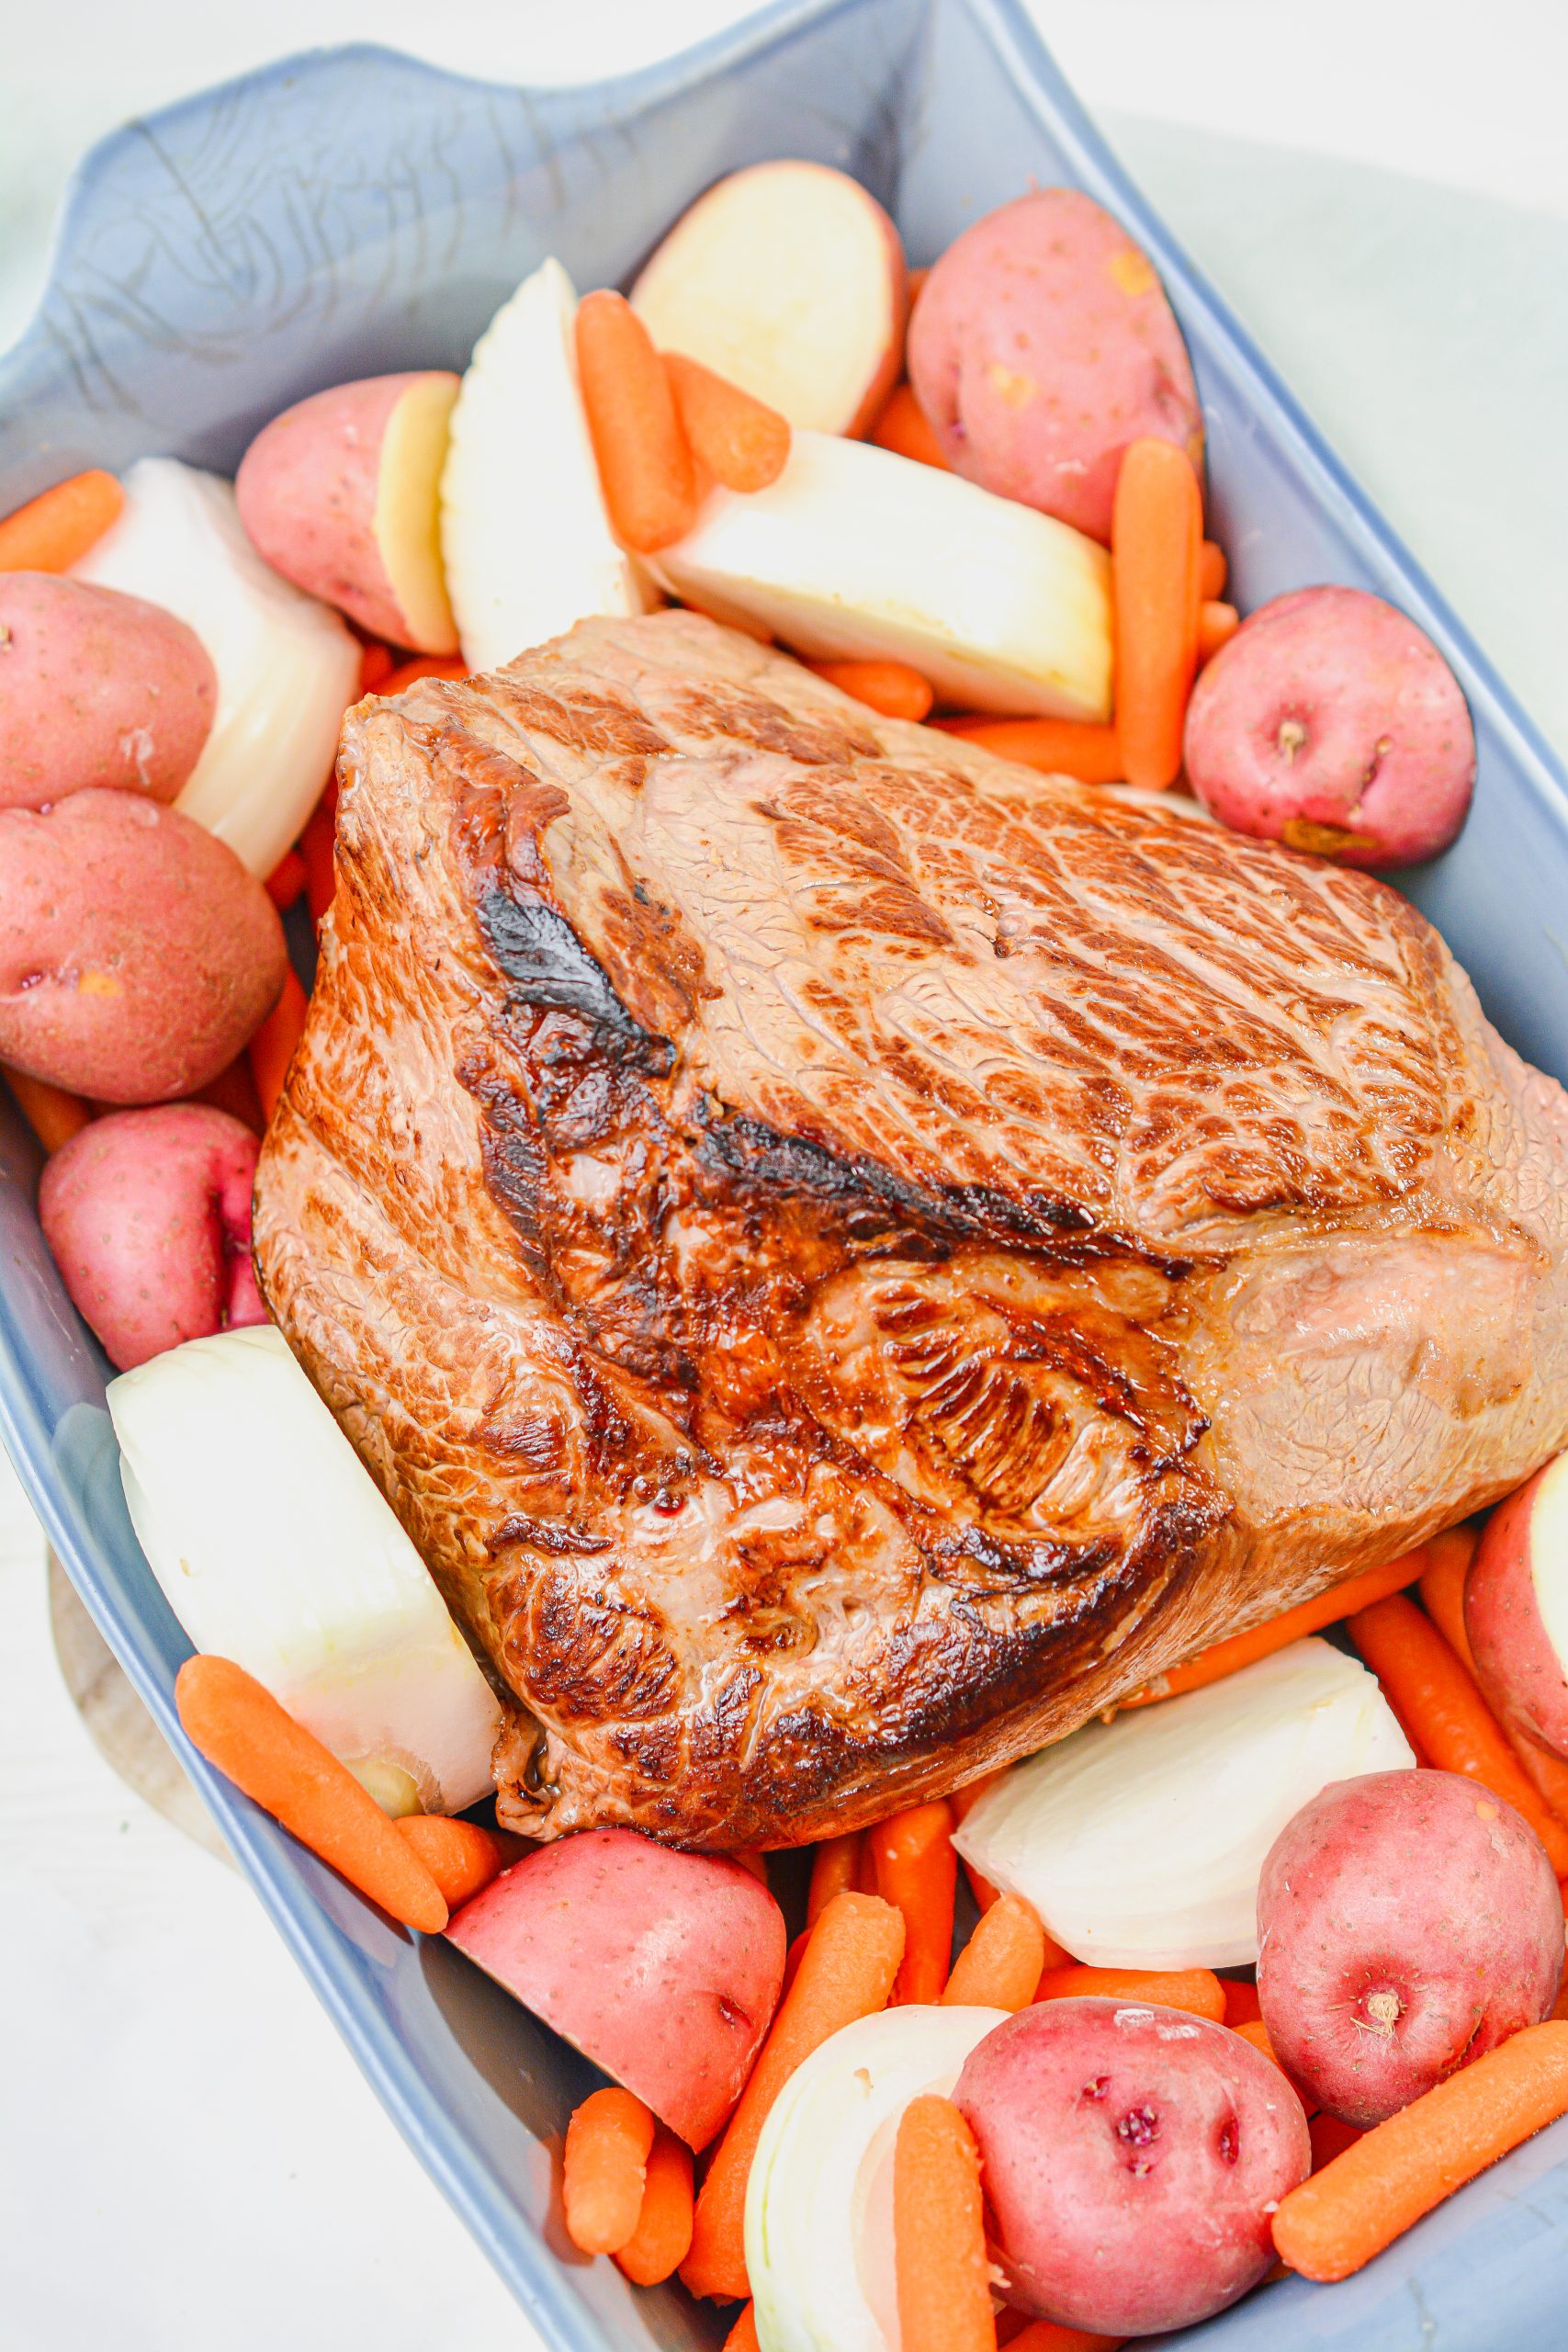 Surround the roast with the vegetables.